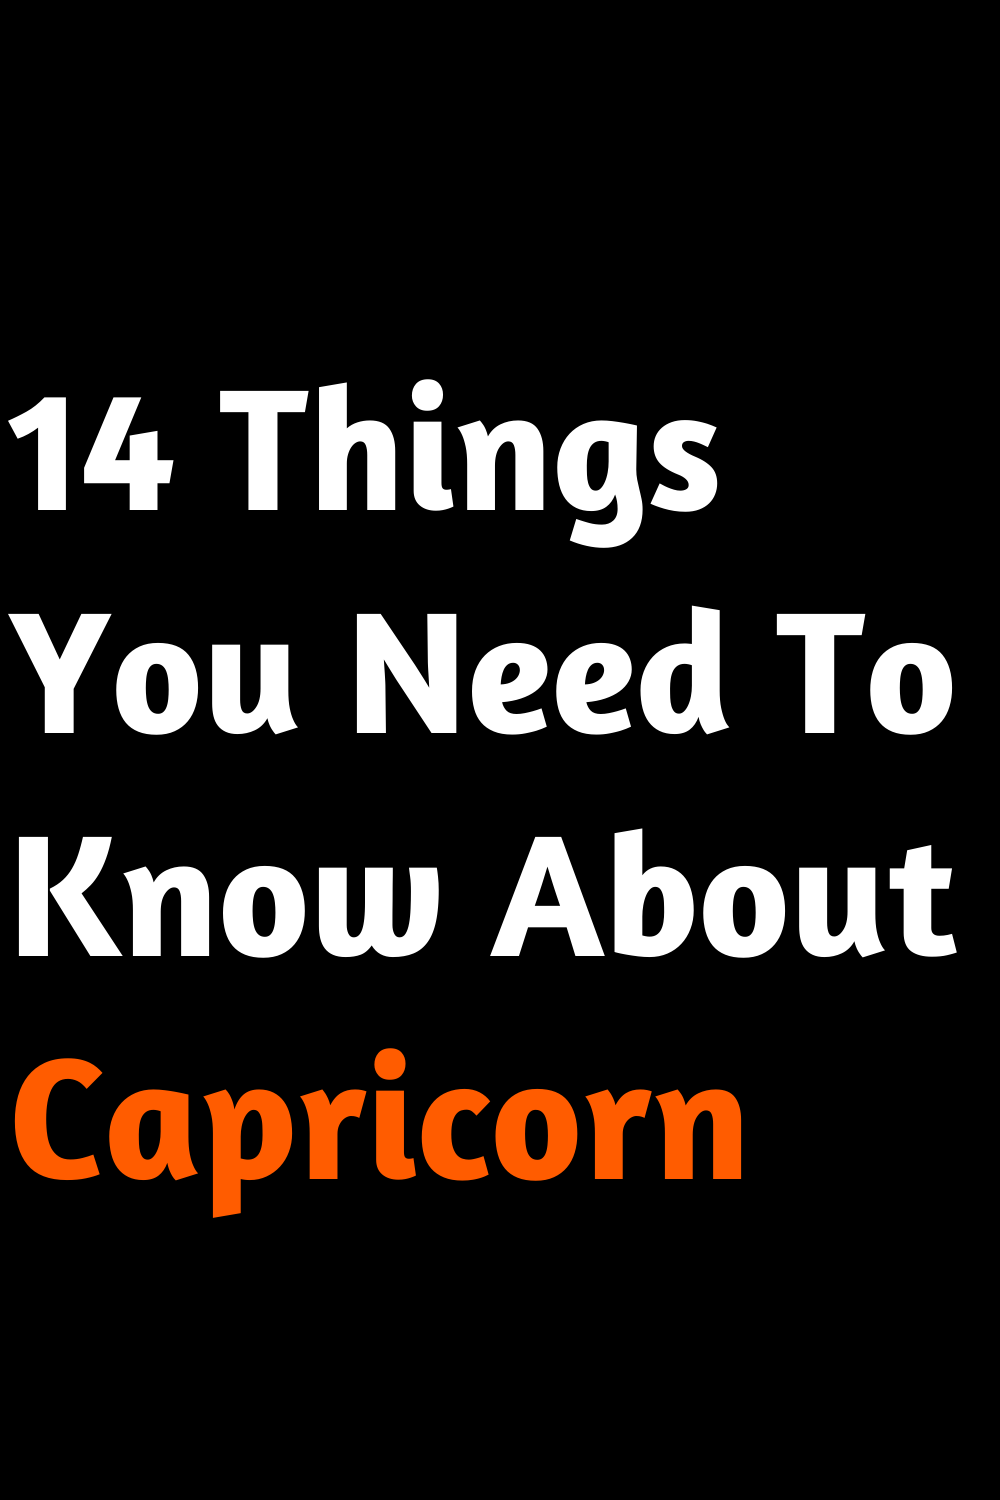 14 Things You Need To Know About Capricorn